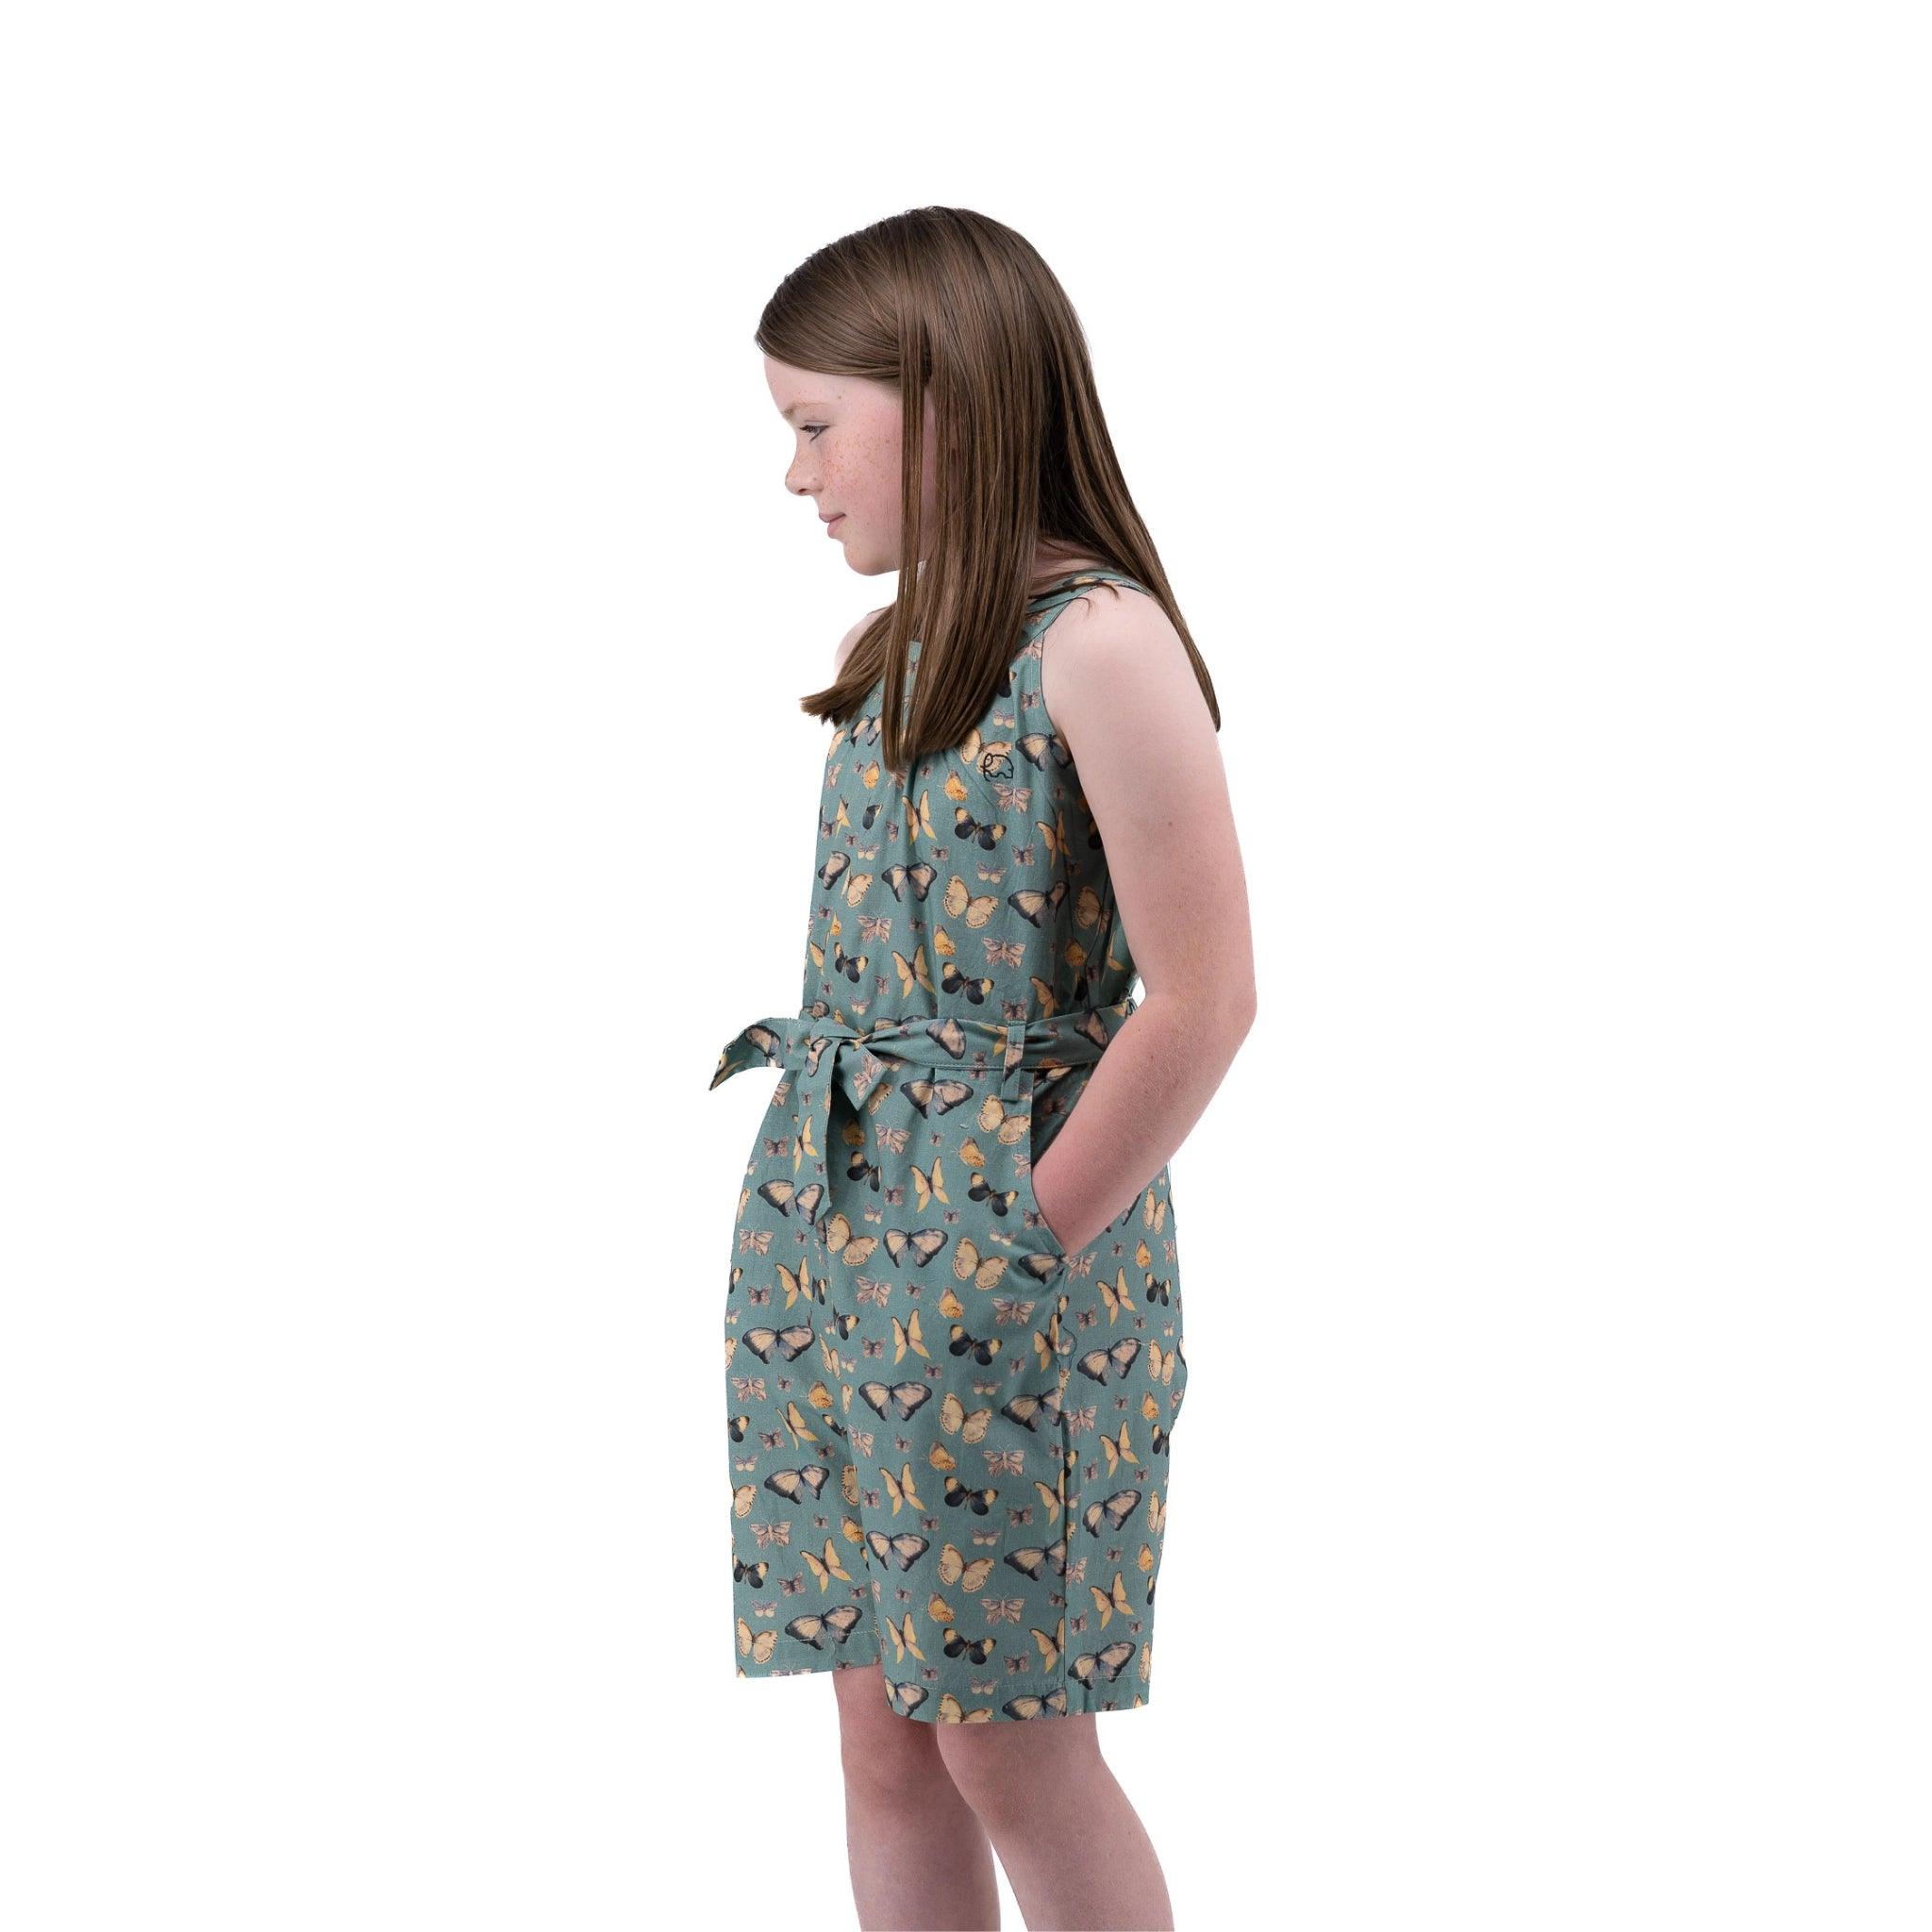 Young girl in a Karee Blue Surf Adventure-ready Cotton Play Suit standing sideways on a white background.